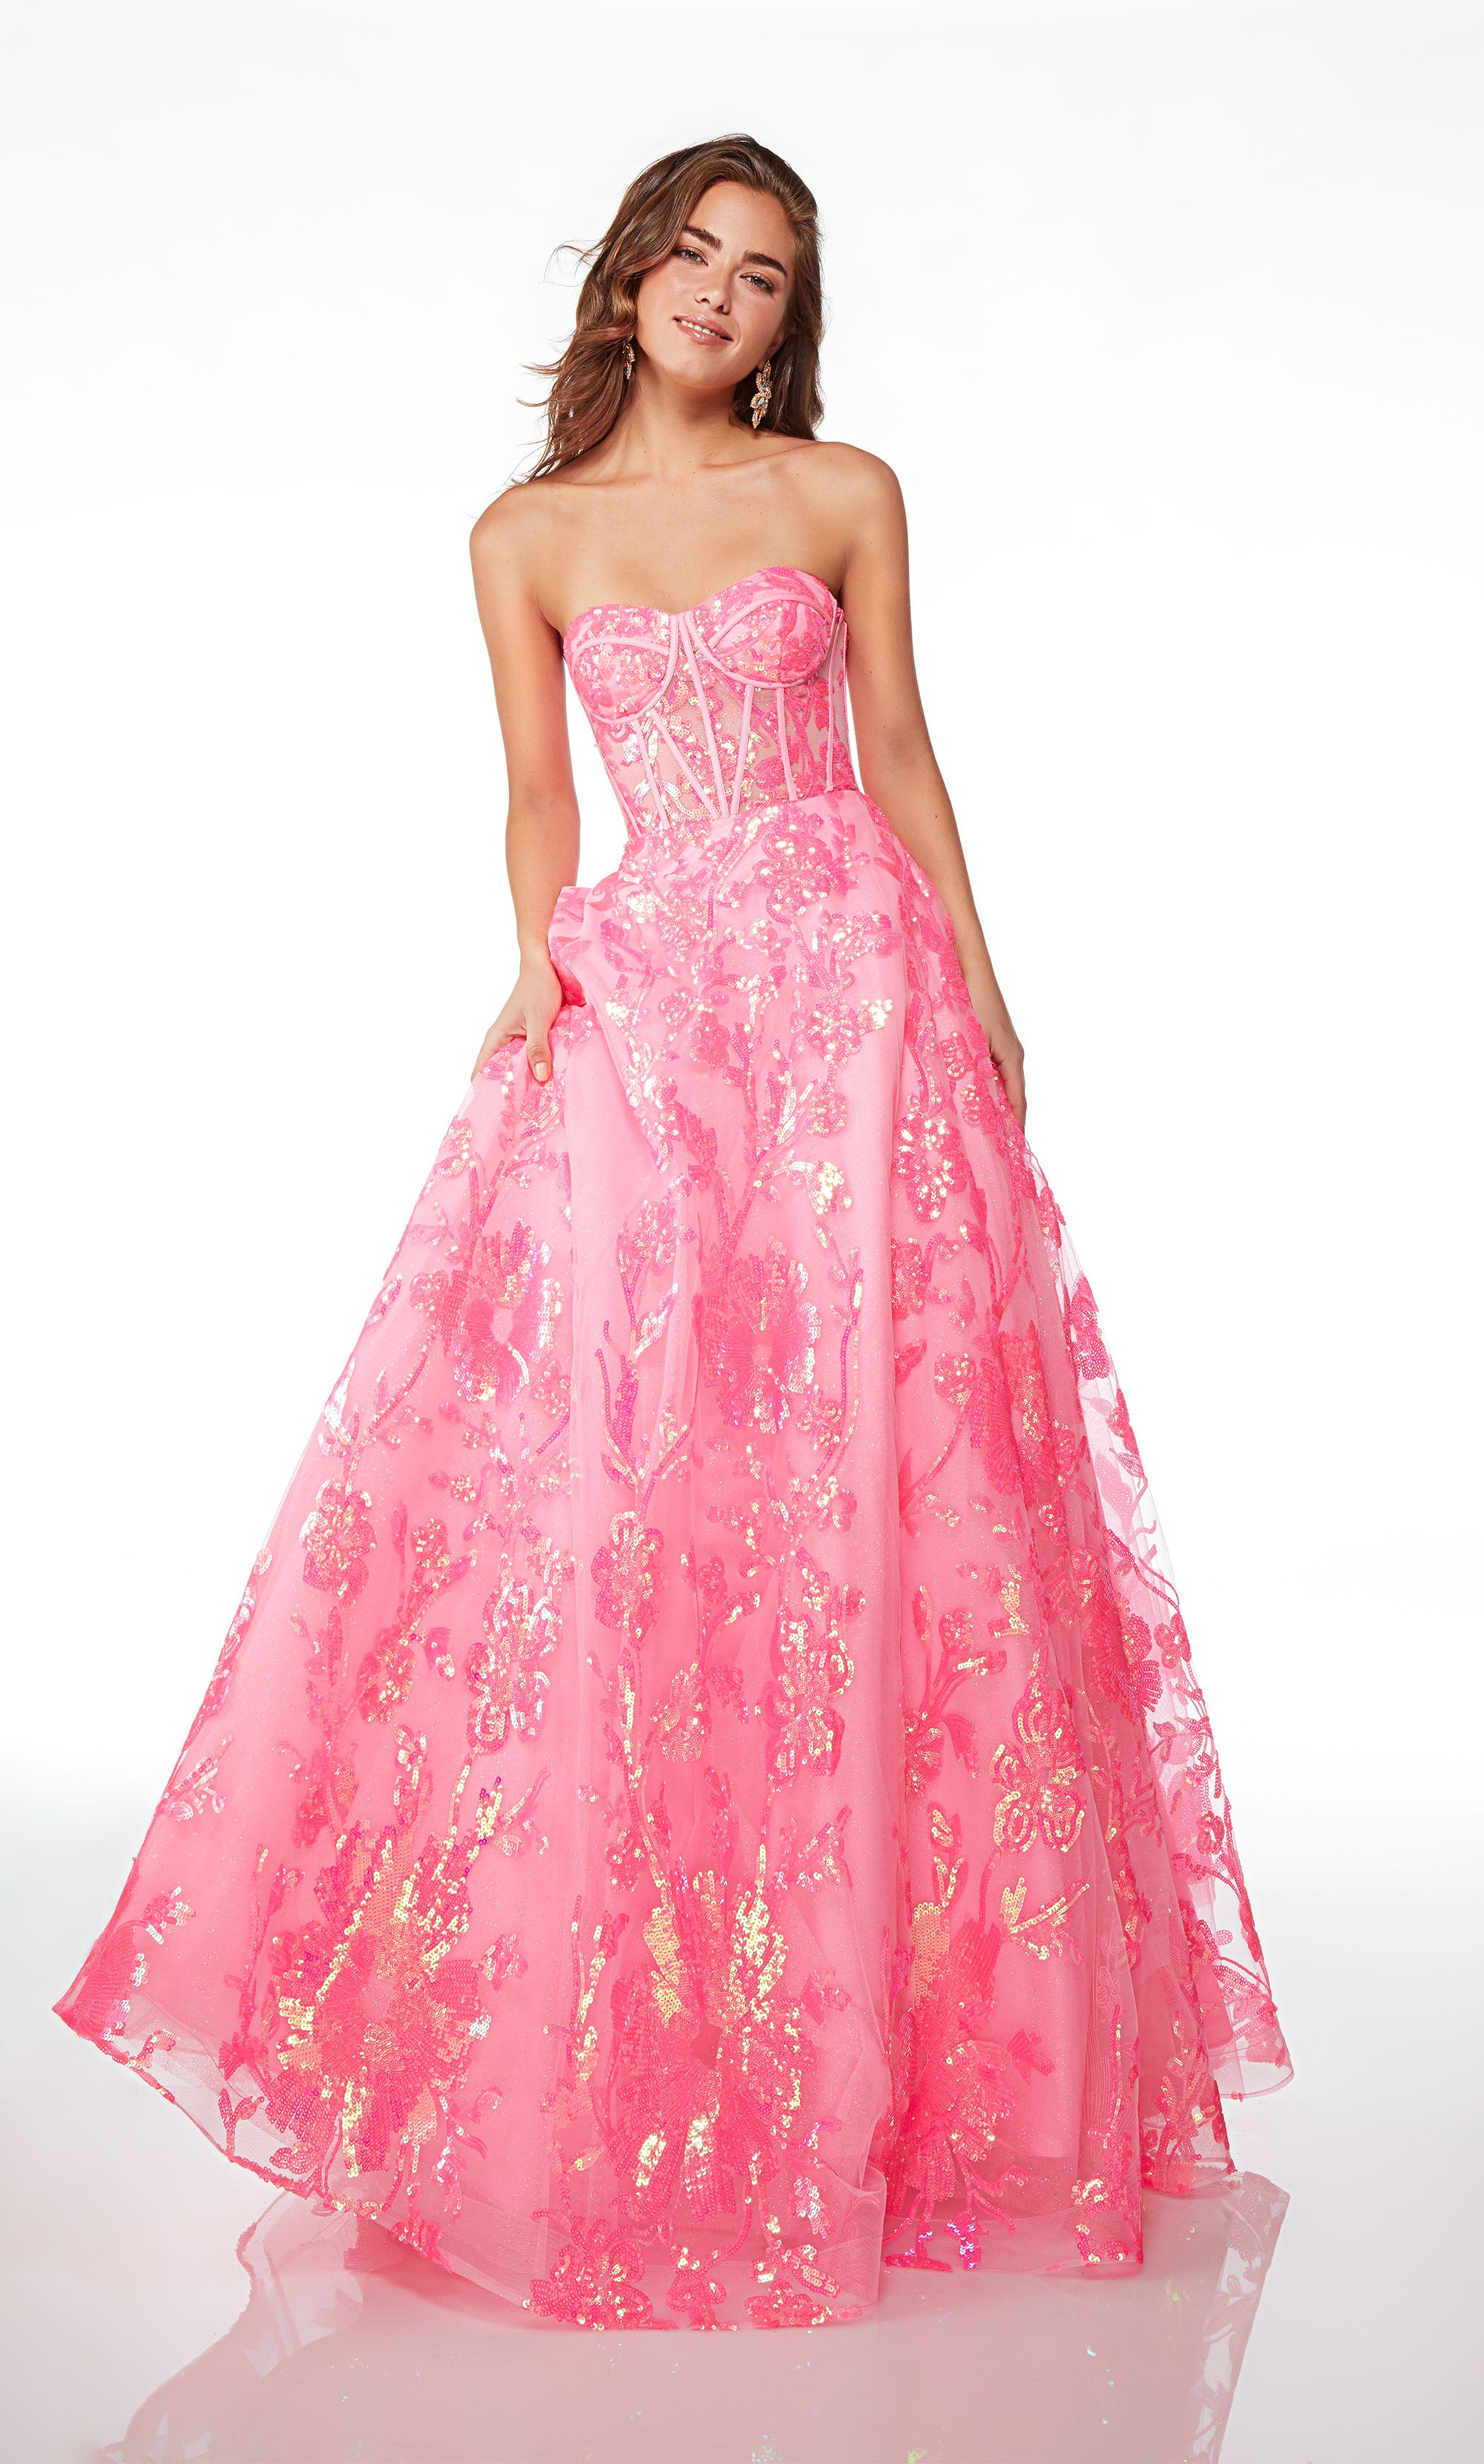 Blocked Account | Princess prom dresses, Blue ball gowns, Ball gowns prom